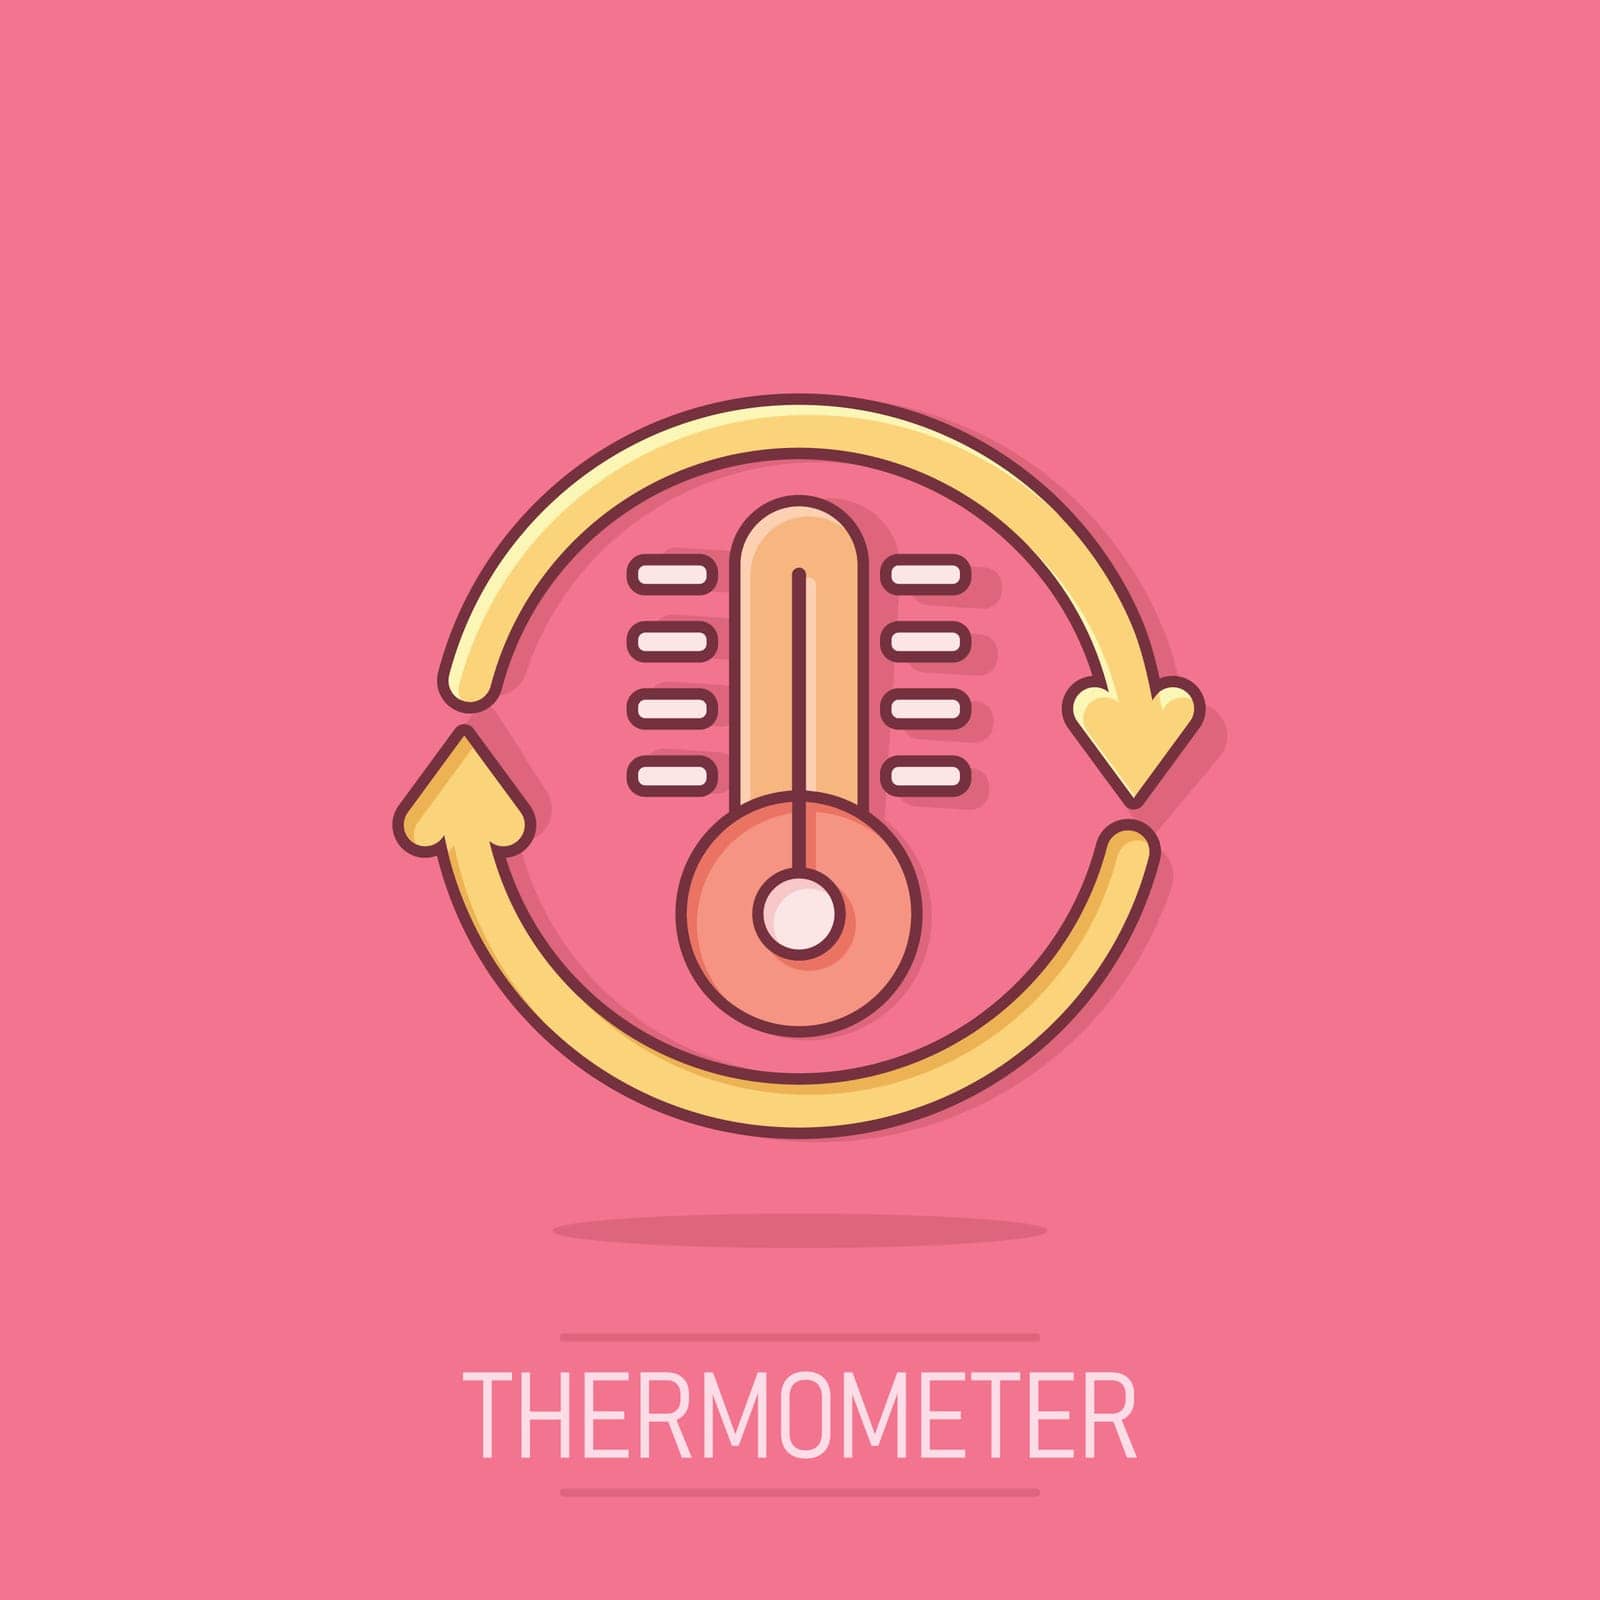 Thermometer climate control icon in comic style. Meteorology balance cartoon vector illustration on isolated background. Hot, cold temperature splash effect business concept. by LysenkoA